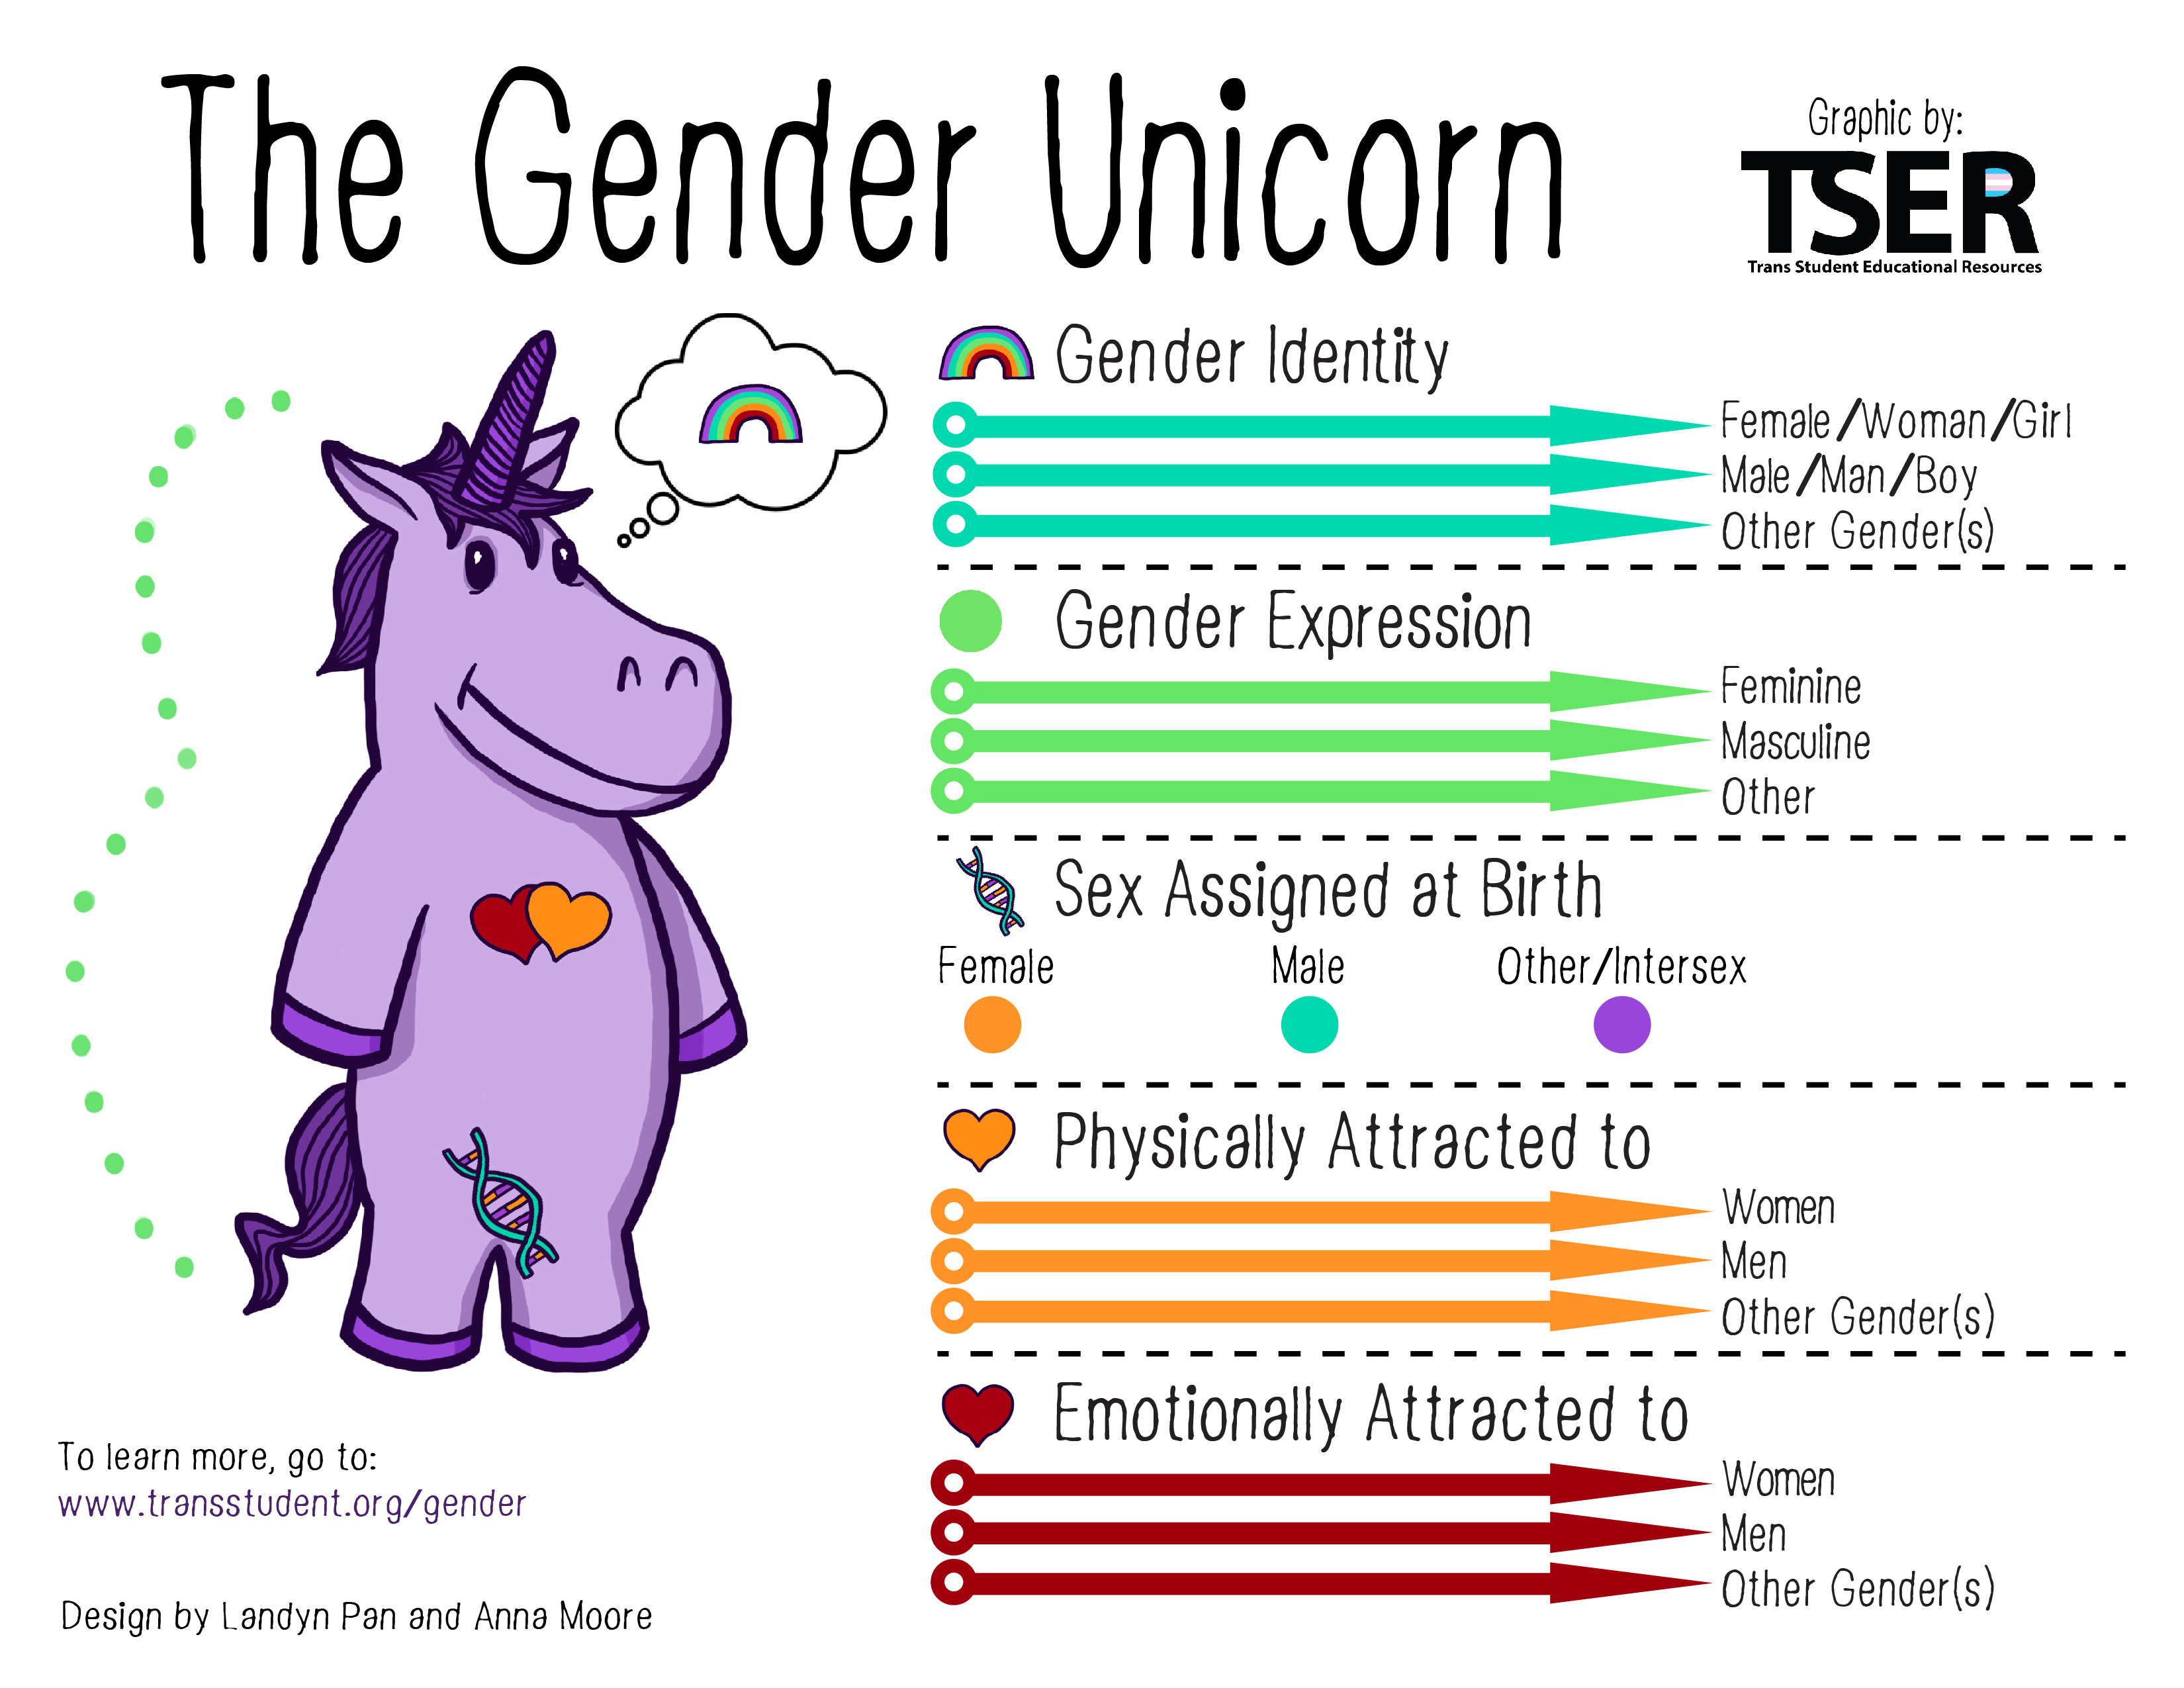 The Trans Student Educational Resources (TSER) organization designed the Gender Unicorn graphic and its website provides important information on definitions and differences